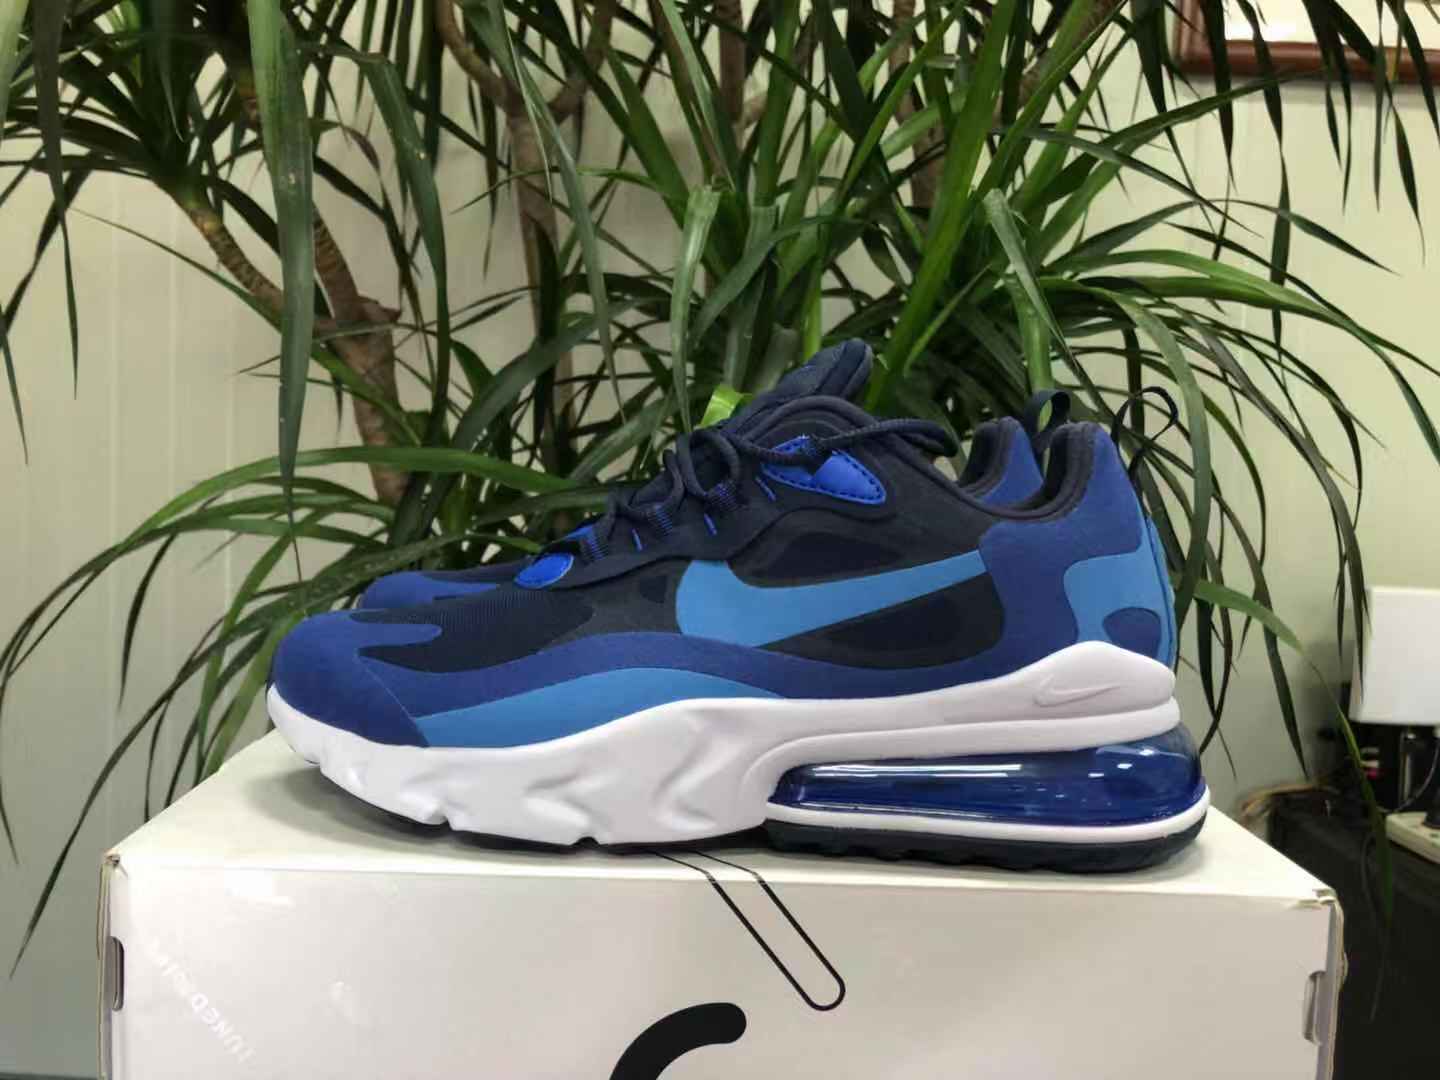 Men's Hot sale Running weapon Nike Air Max Shoes 052